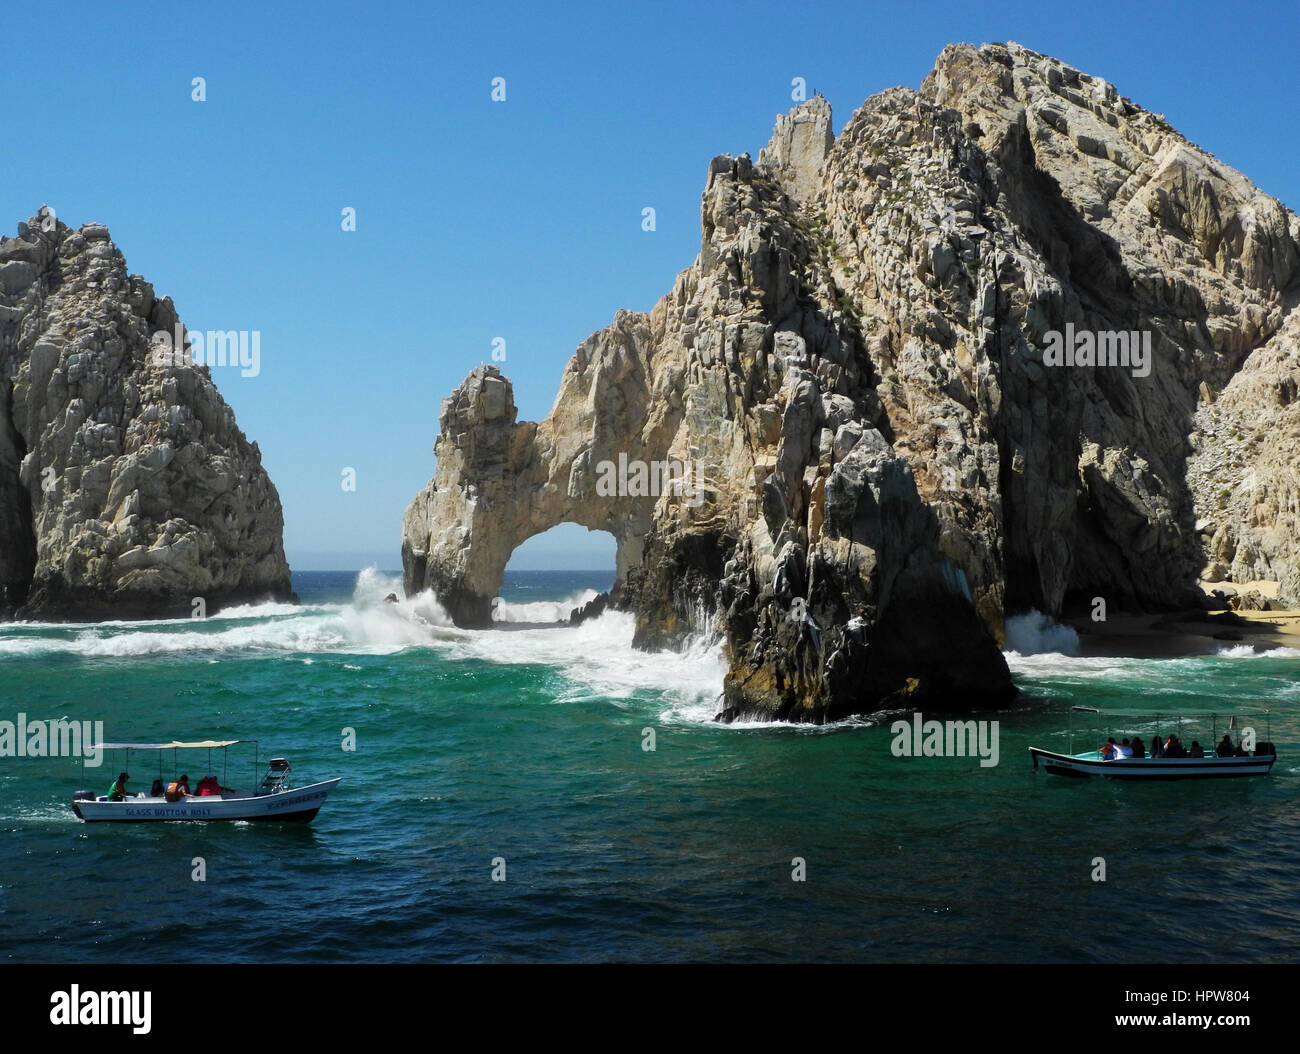 Two tourist boats at the rock formation known as Land's End Arch in Cabo San Lucas, Baja, Mexico. Stock Photo